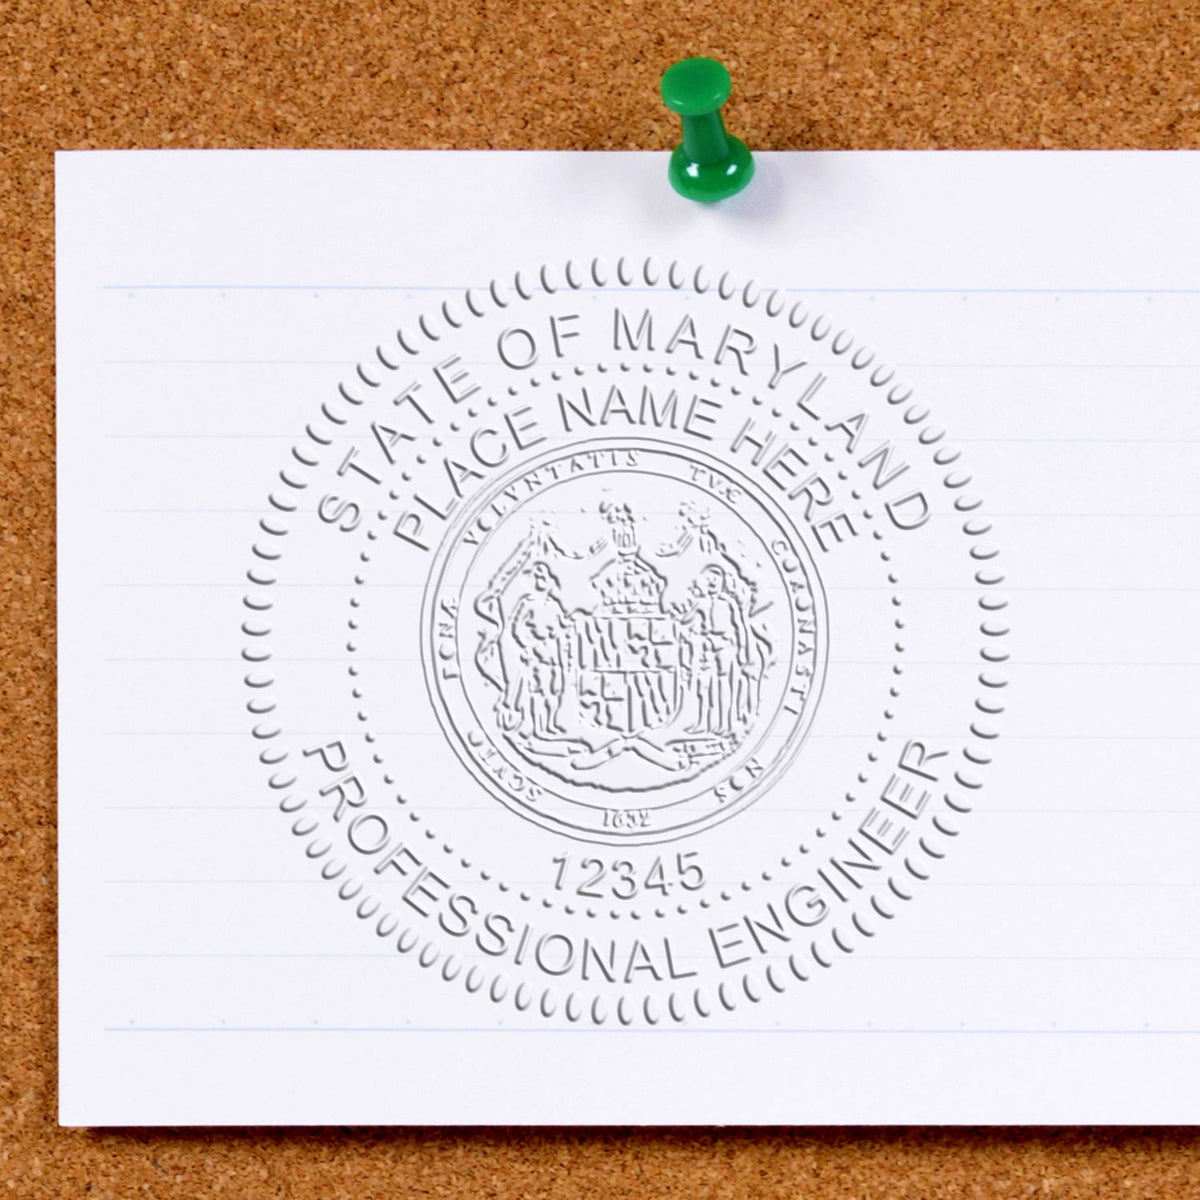 An in use photo of the Gift Maryland Engineer Seal showing a sample imprint on a cardstock